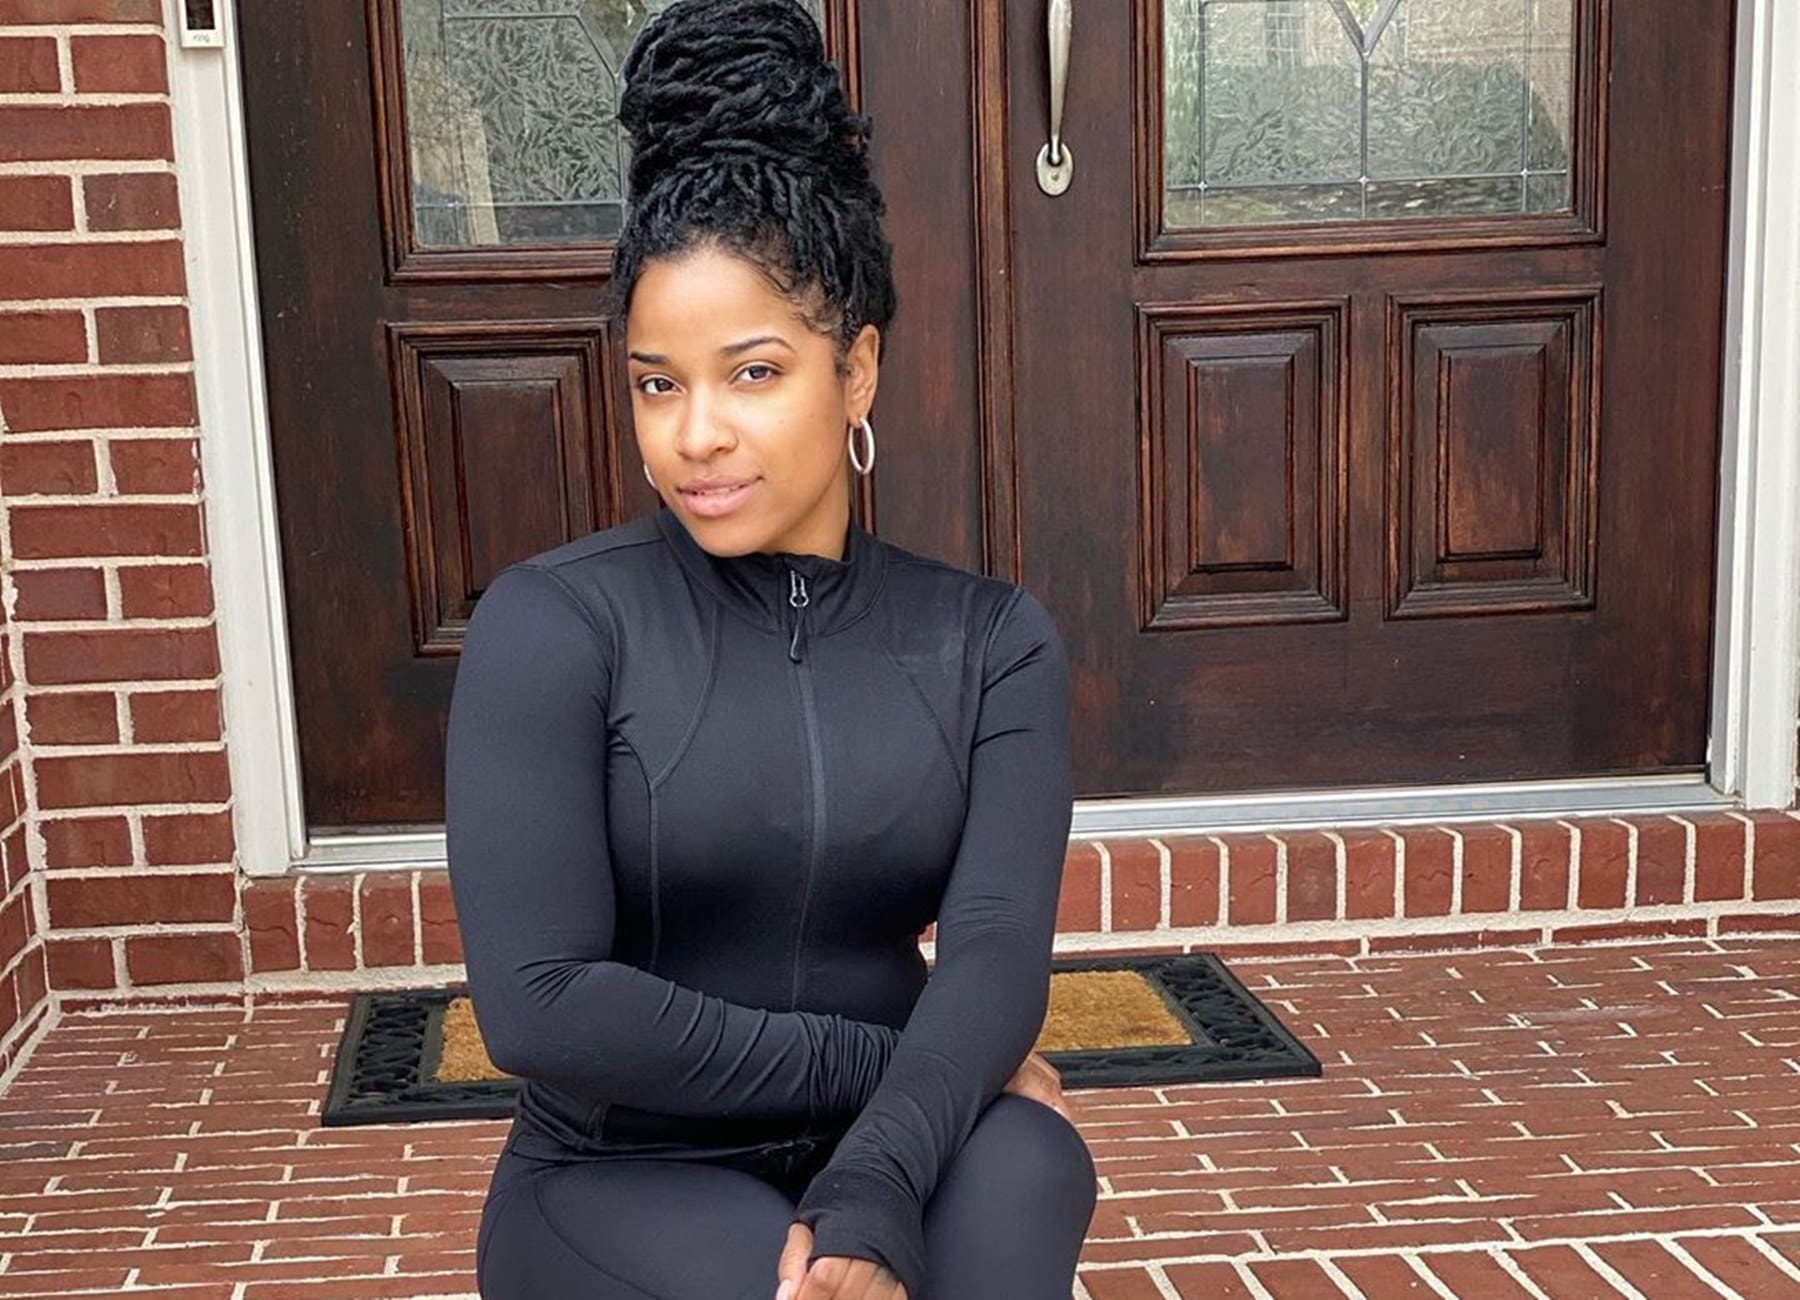 Toya Johnson Drops An Amazing Hair Care Tip - Watch Her Video